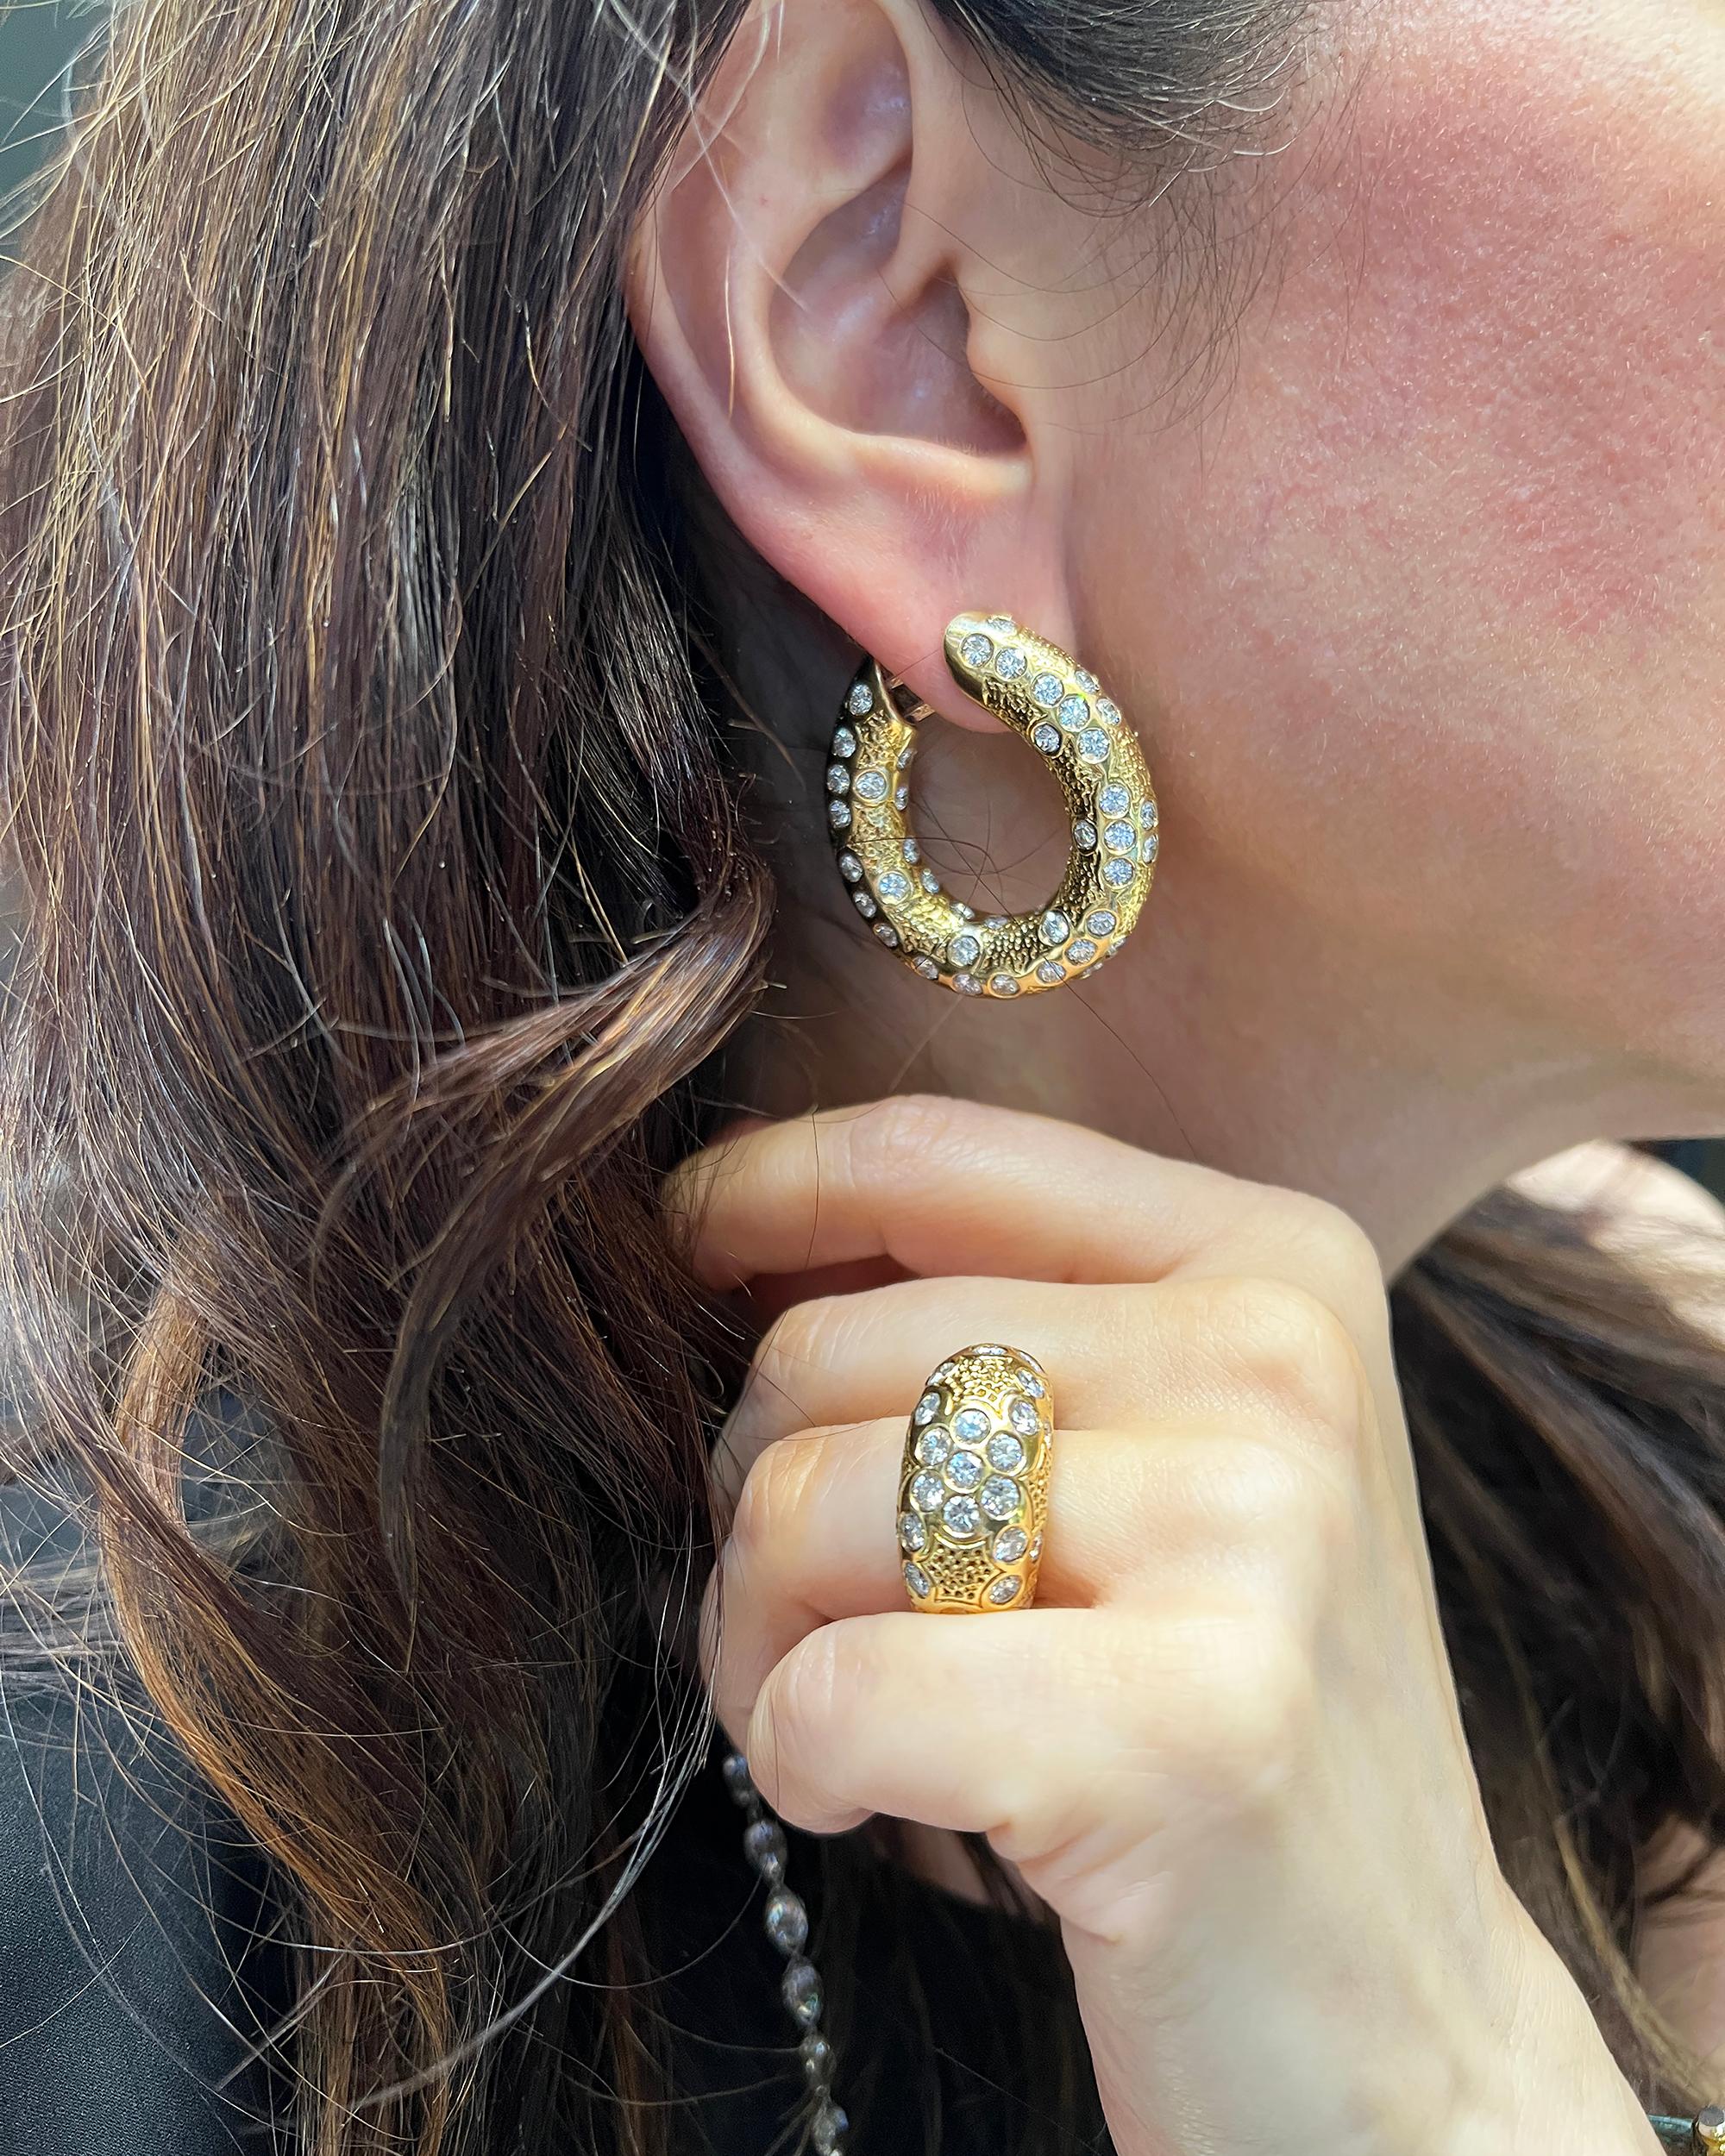 A vintage jewelry suite comprising of the earrings and ring, created by Van Cleef & Arpels in 1970s.
The earrings are encrusted with round diamonds, weighing a total of 12 carats. 
The ring has a total of 4.5 carats of diamonds. 
All diamonds are